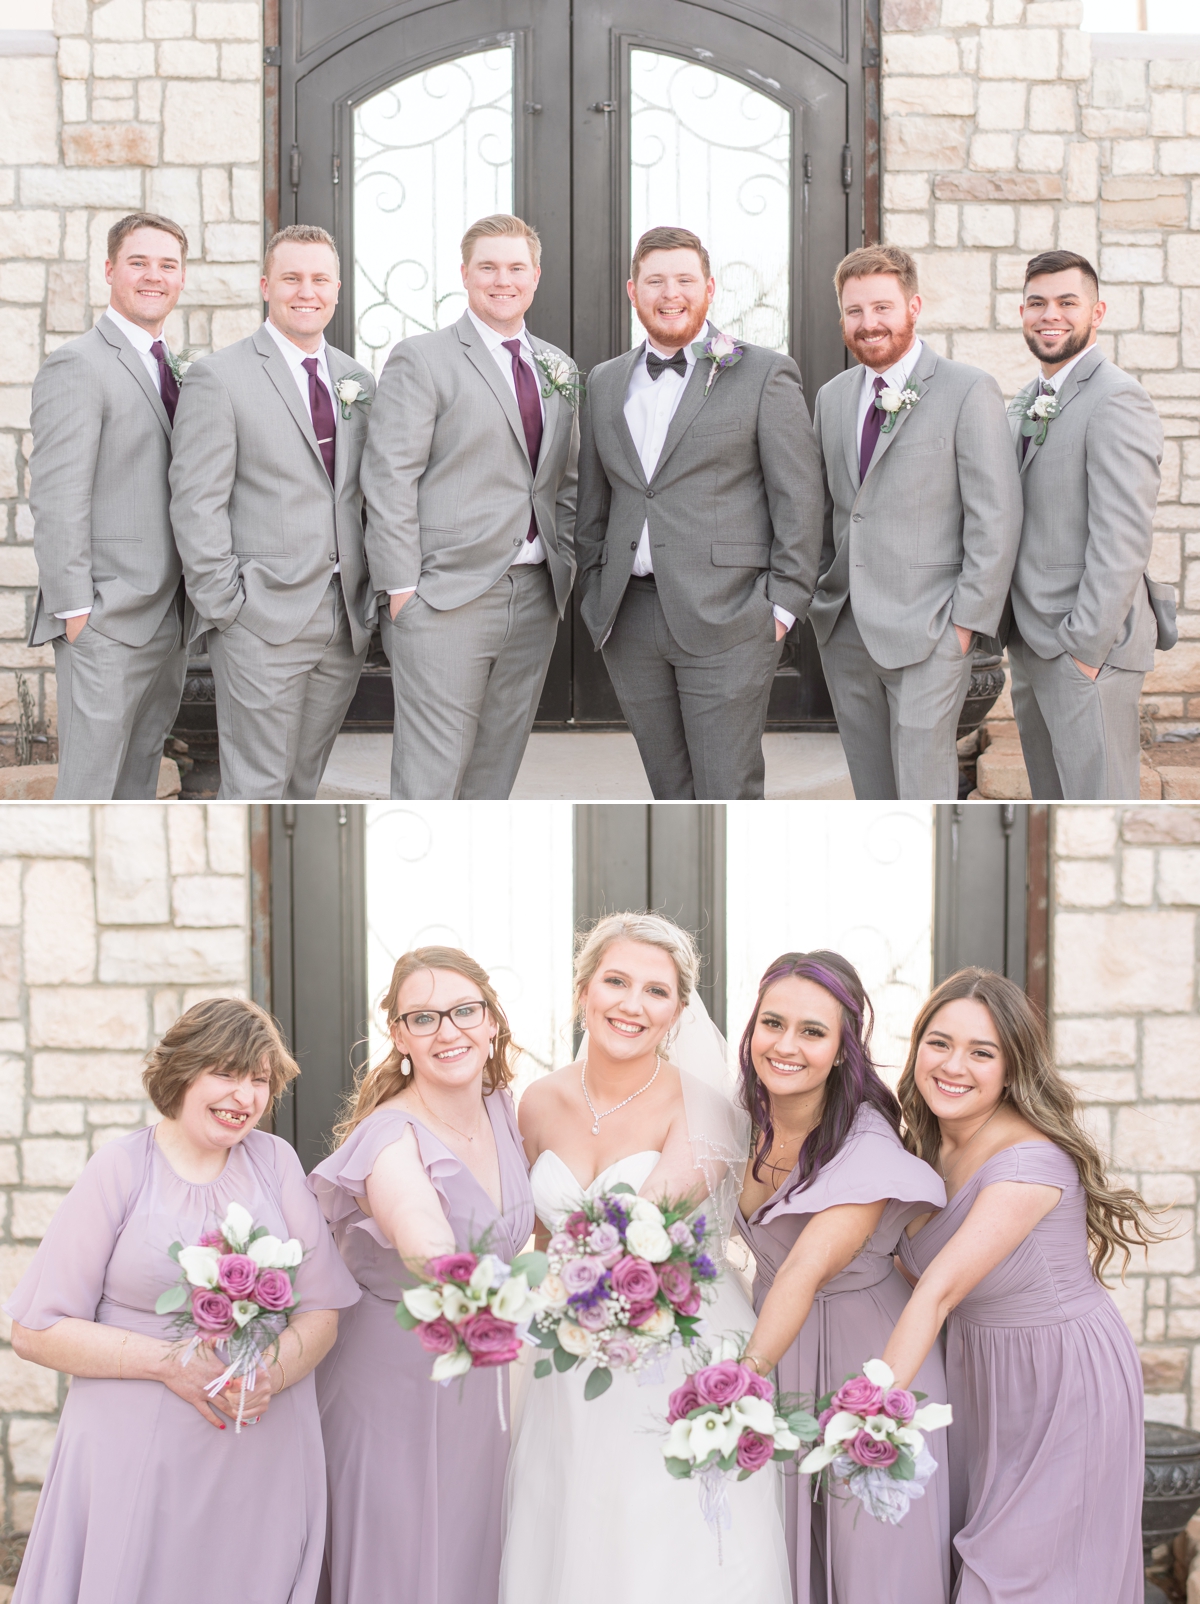 bridesmaids and groomsmen pictured outside in courtyard at Bella vie